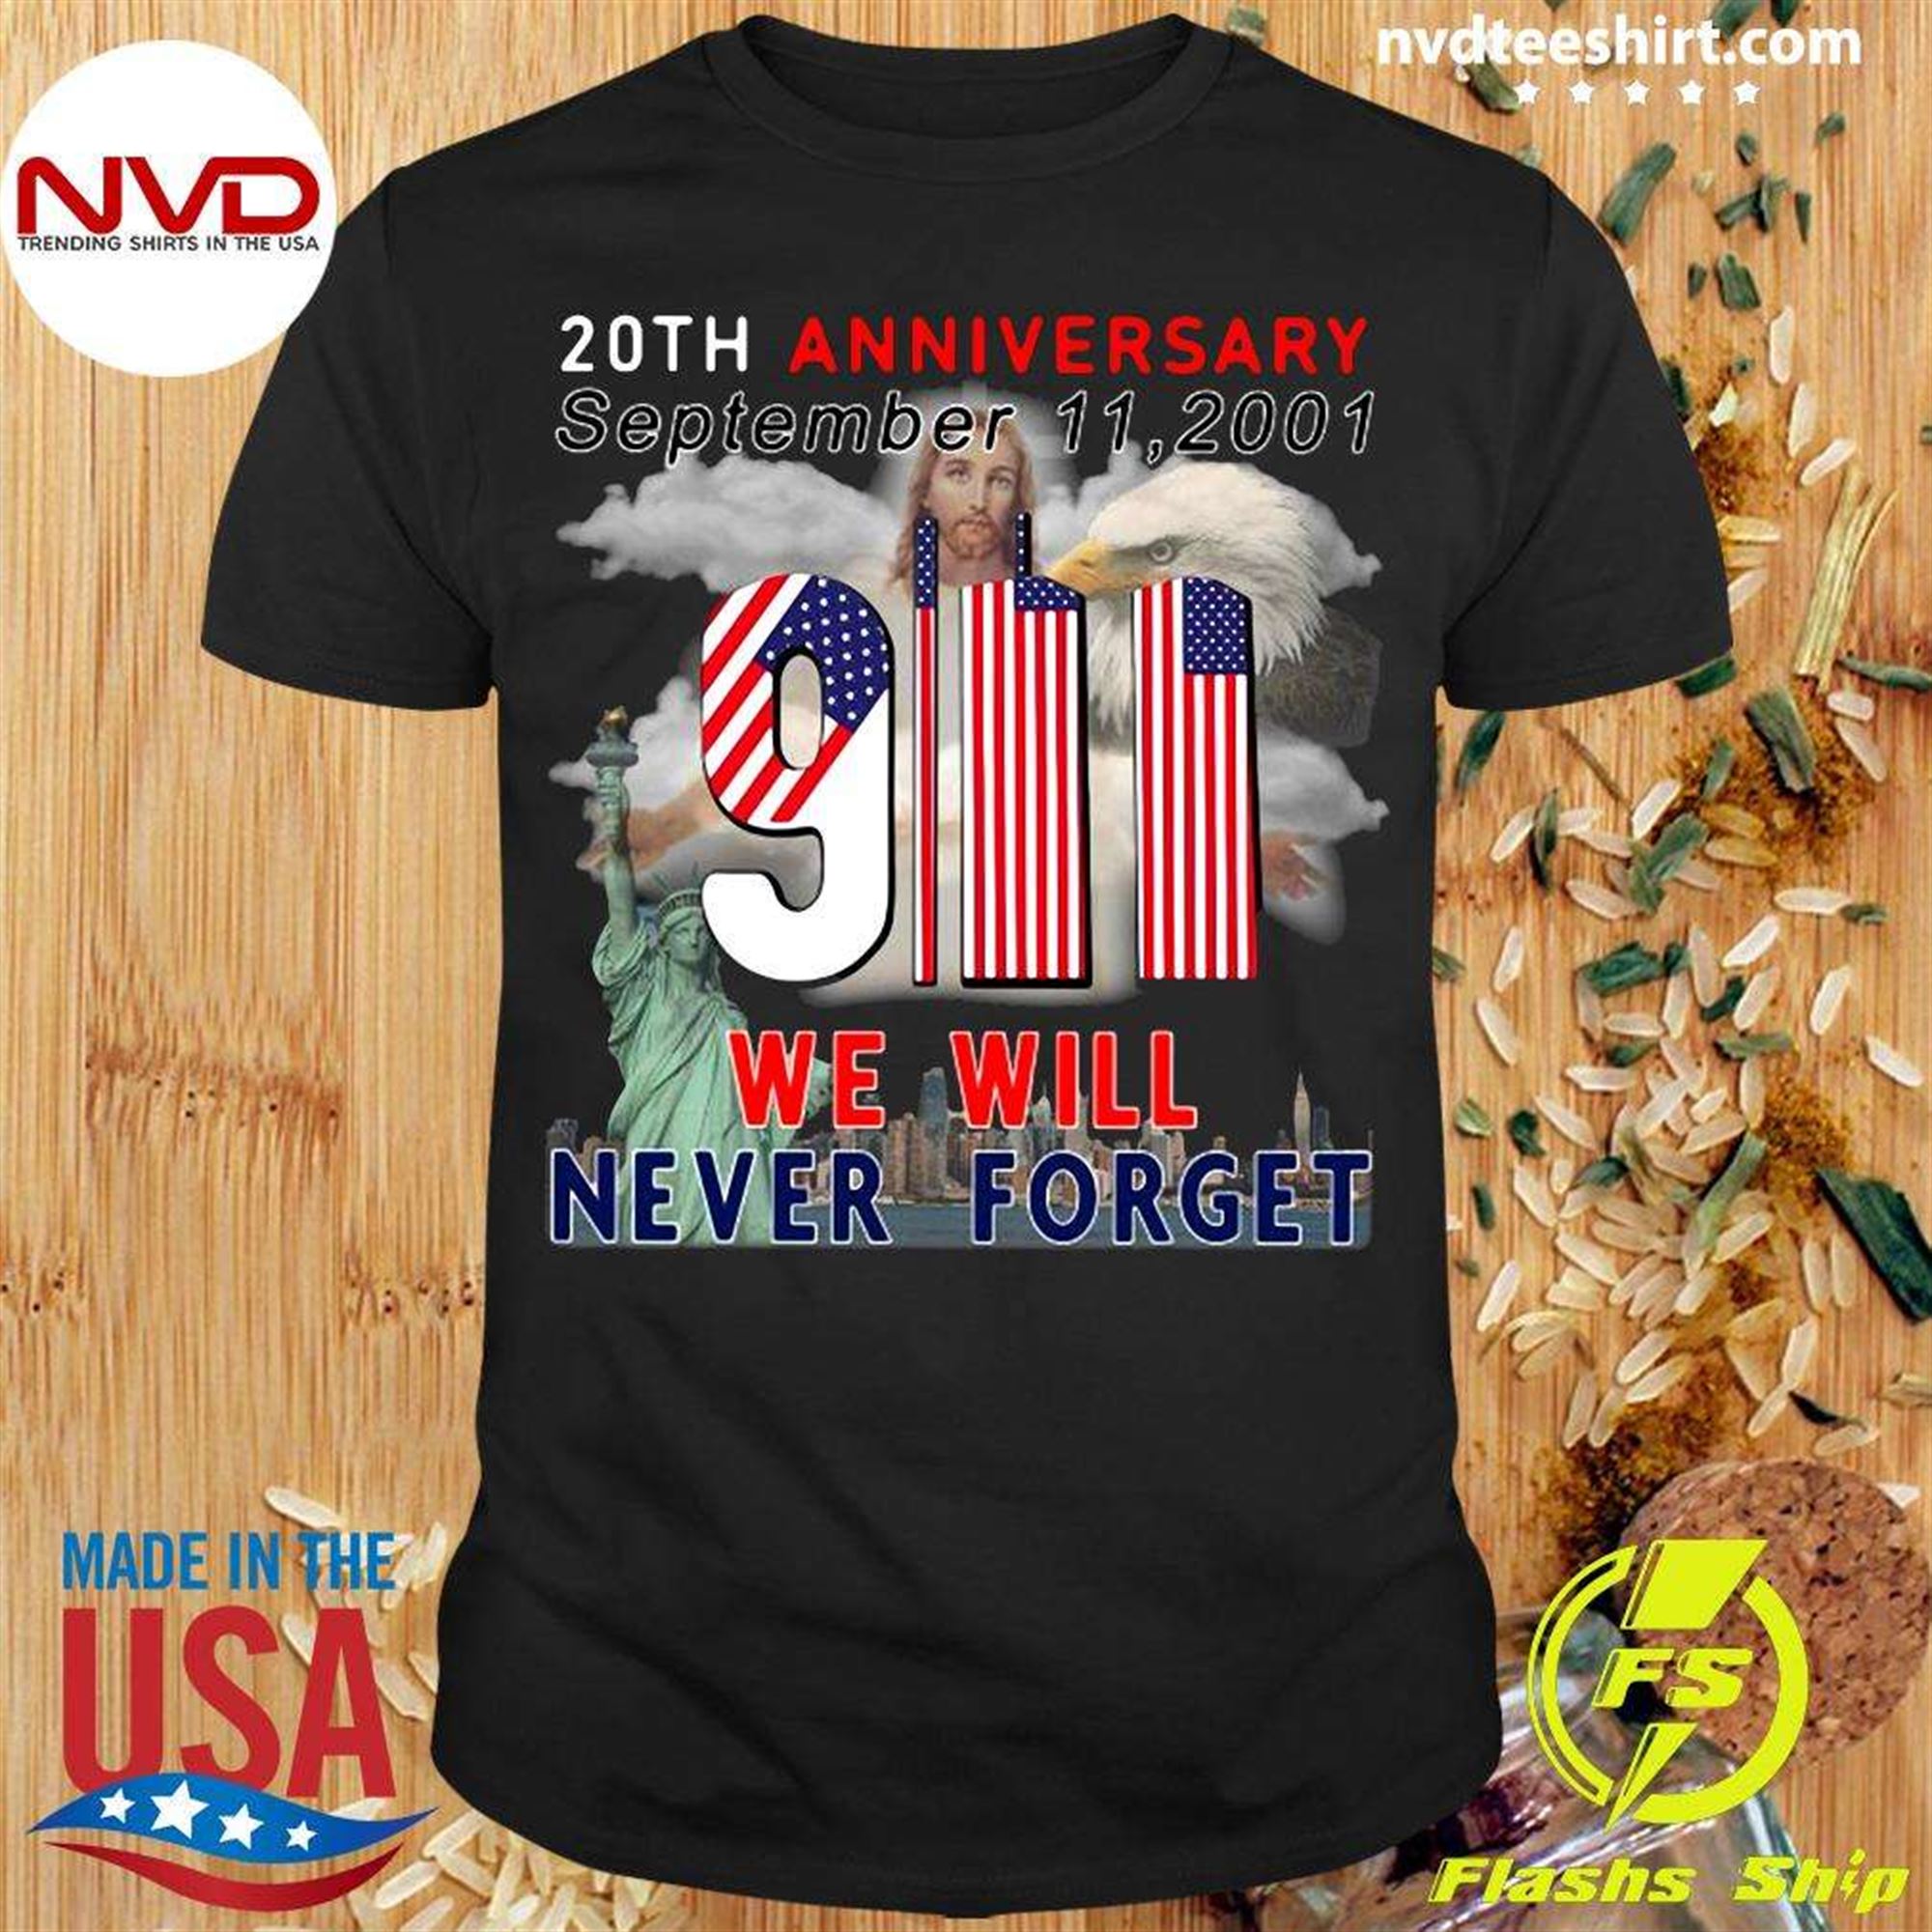 Official American Flag 20th Anniversary September 9-11-2001 We Will Never Forget T-shirt Plus Size Up To 5xl